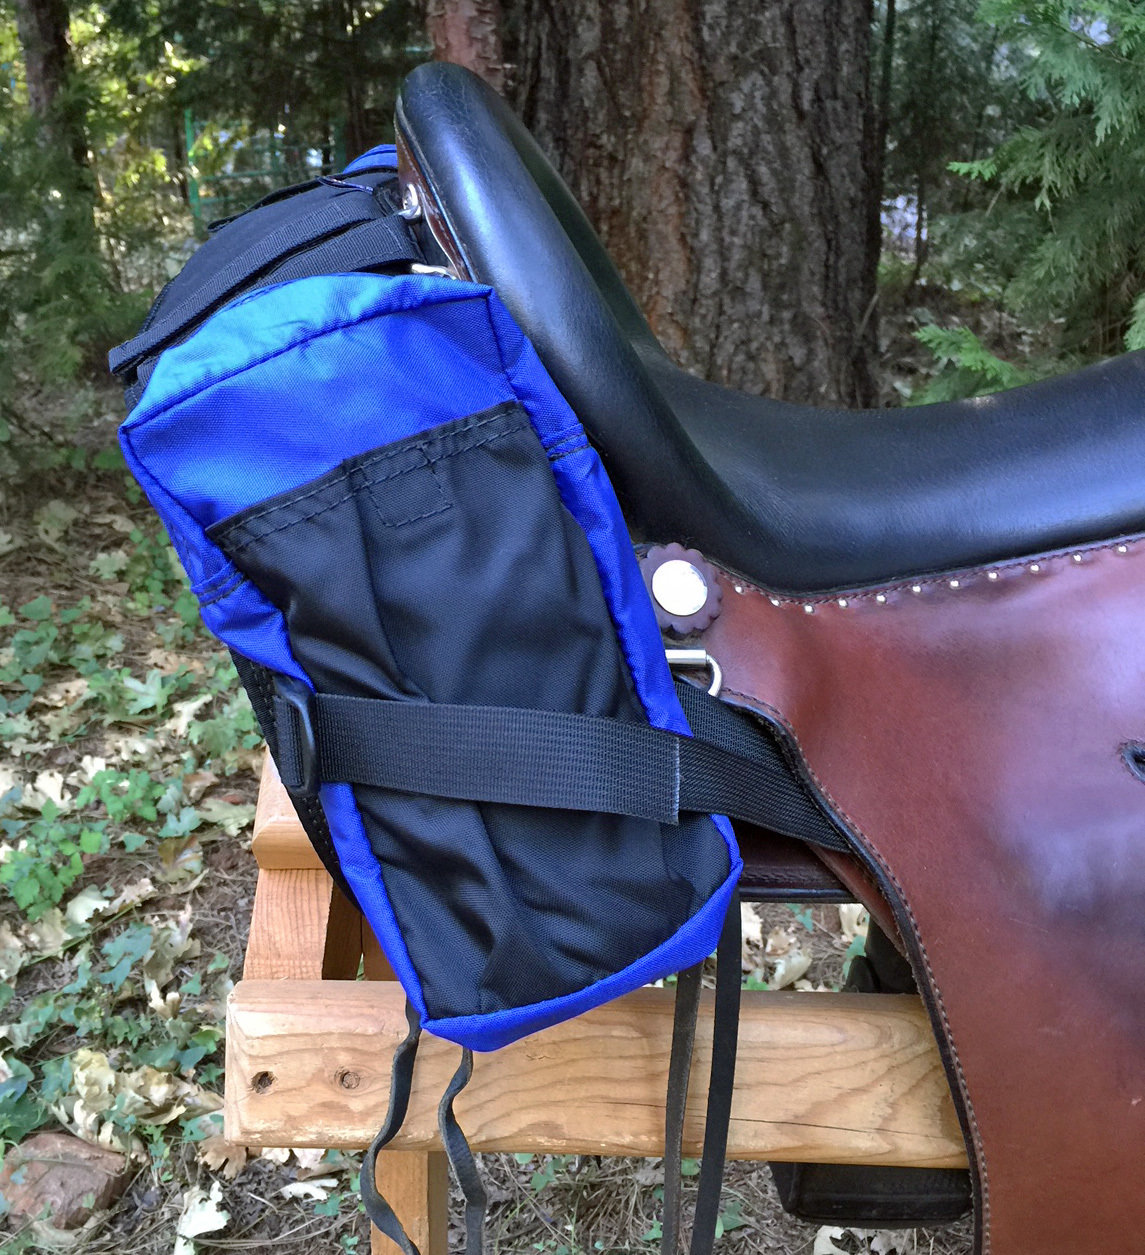 Top view of Cantel bag - notice the extra straps for fitting lots of saddles.